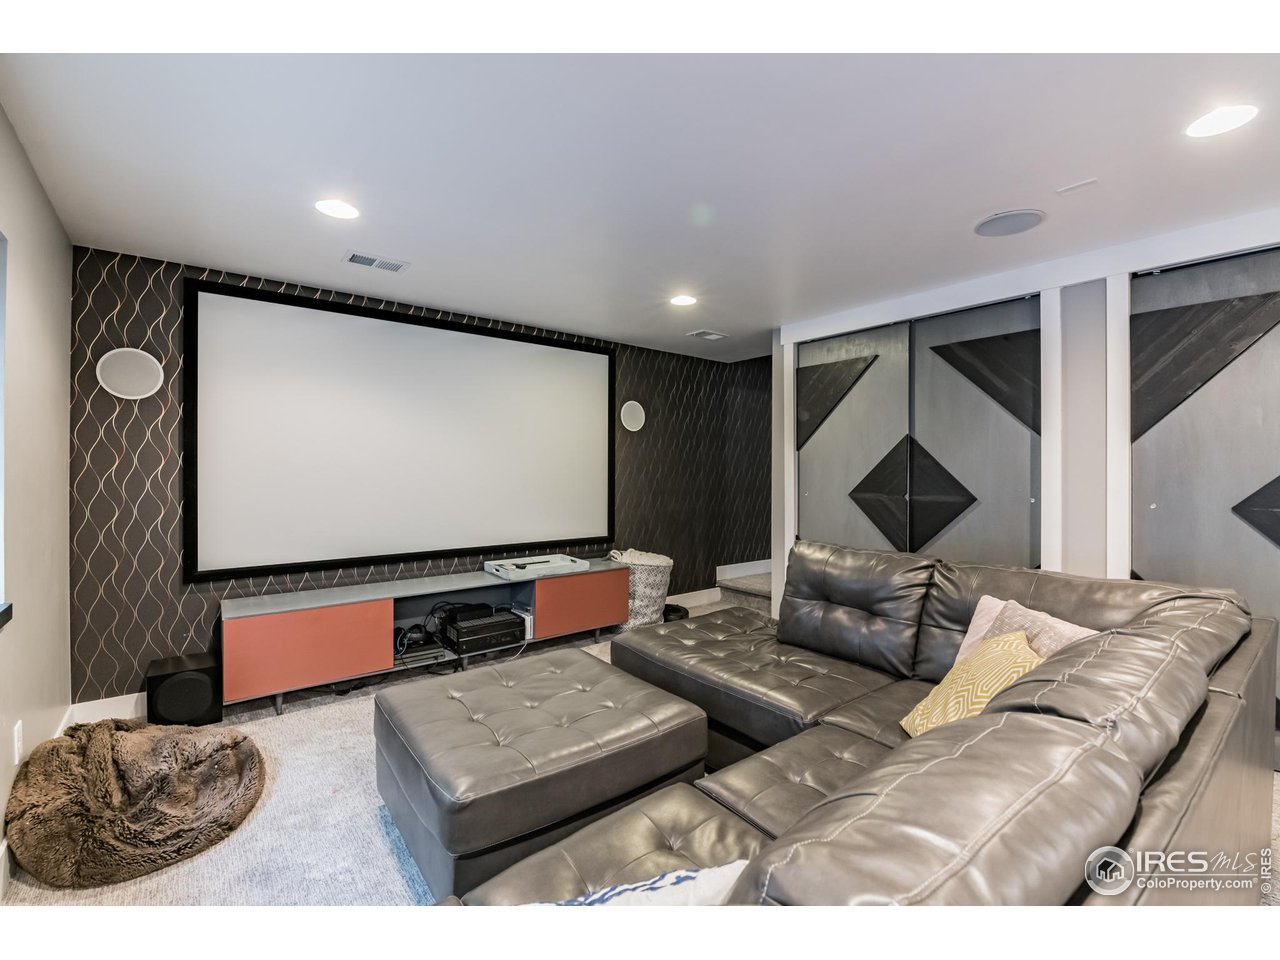 your own private movie theater in the basement